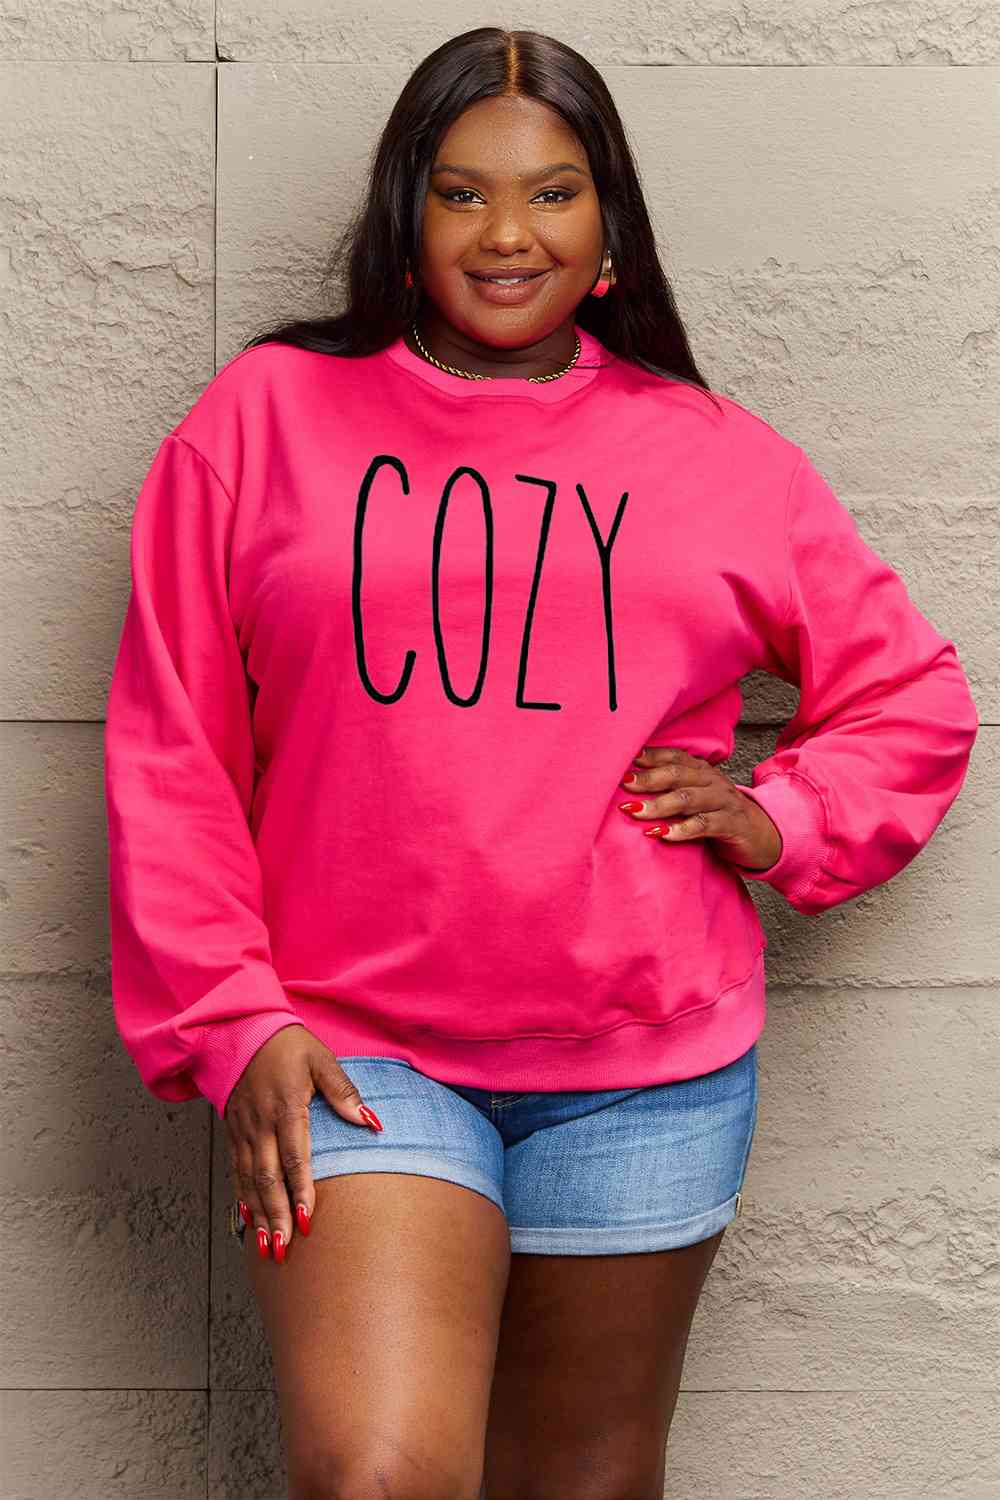 Simply Love Full Size COZY Graphic Sweatshirt - Guy Christopher